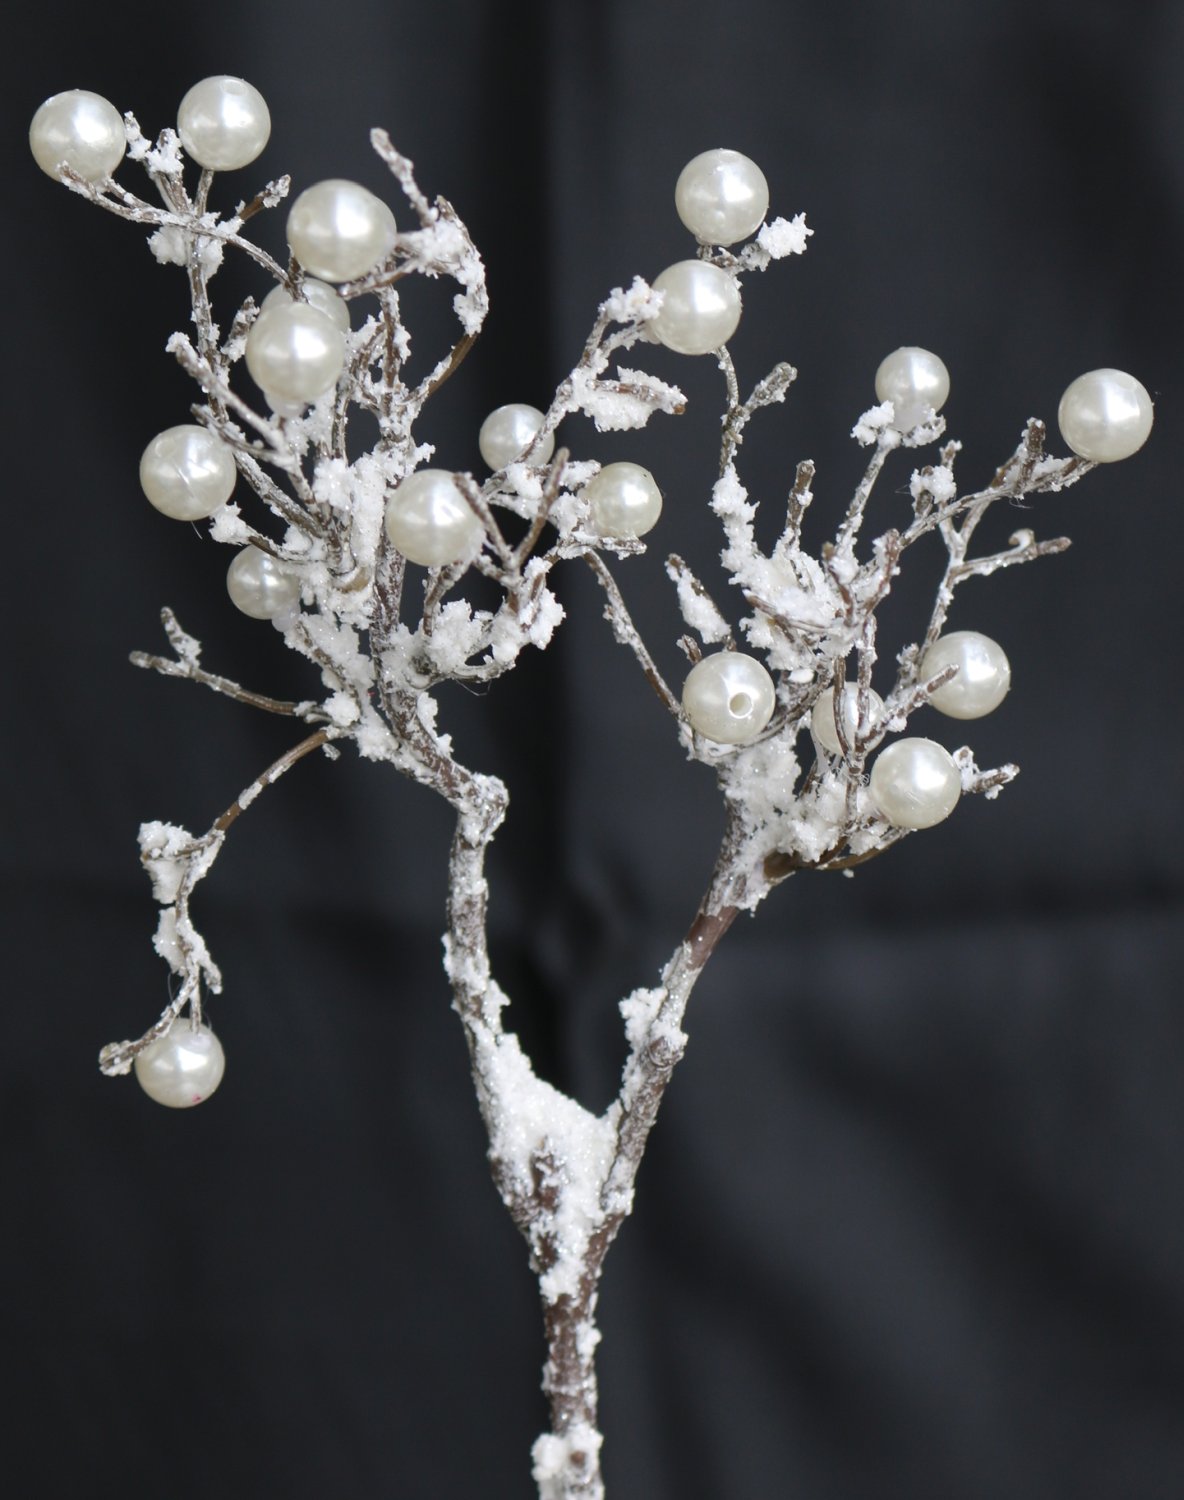 Artificial plant spray with pearls and snow, 30 cm, frosted brown